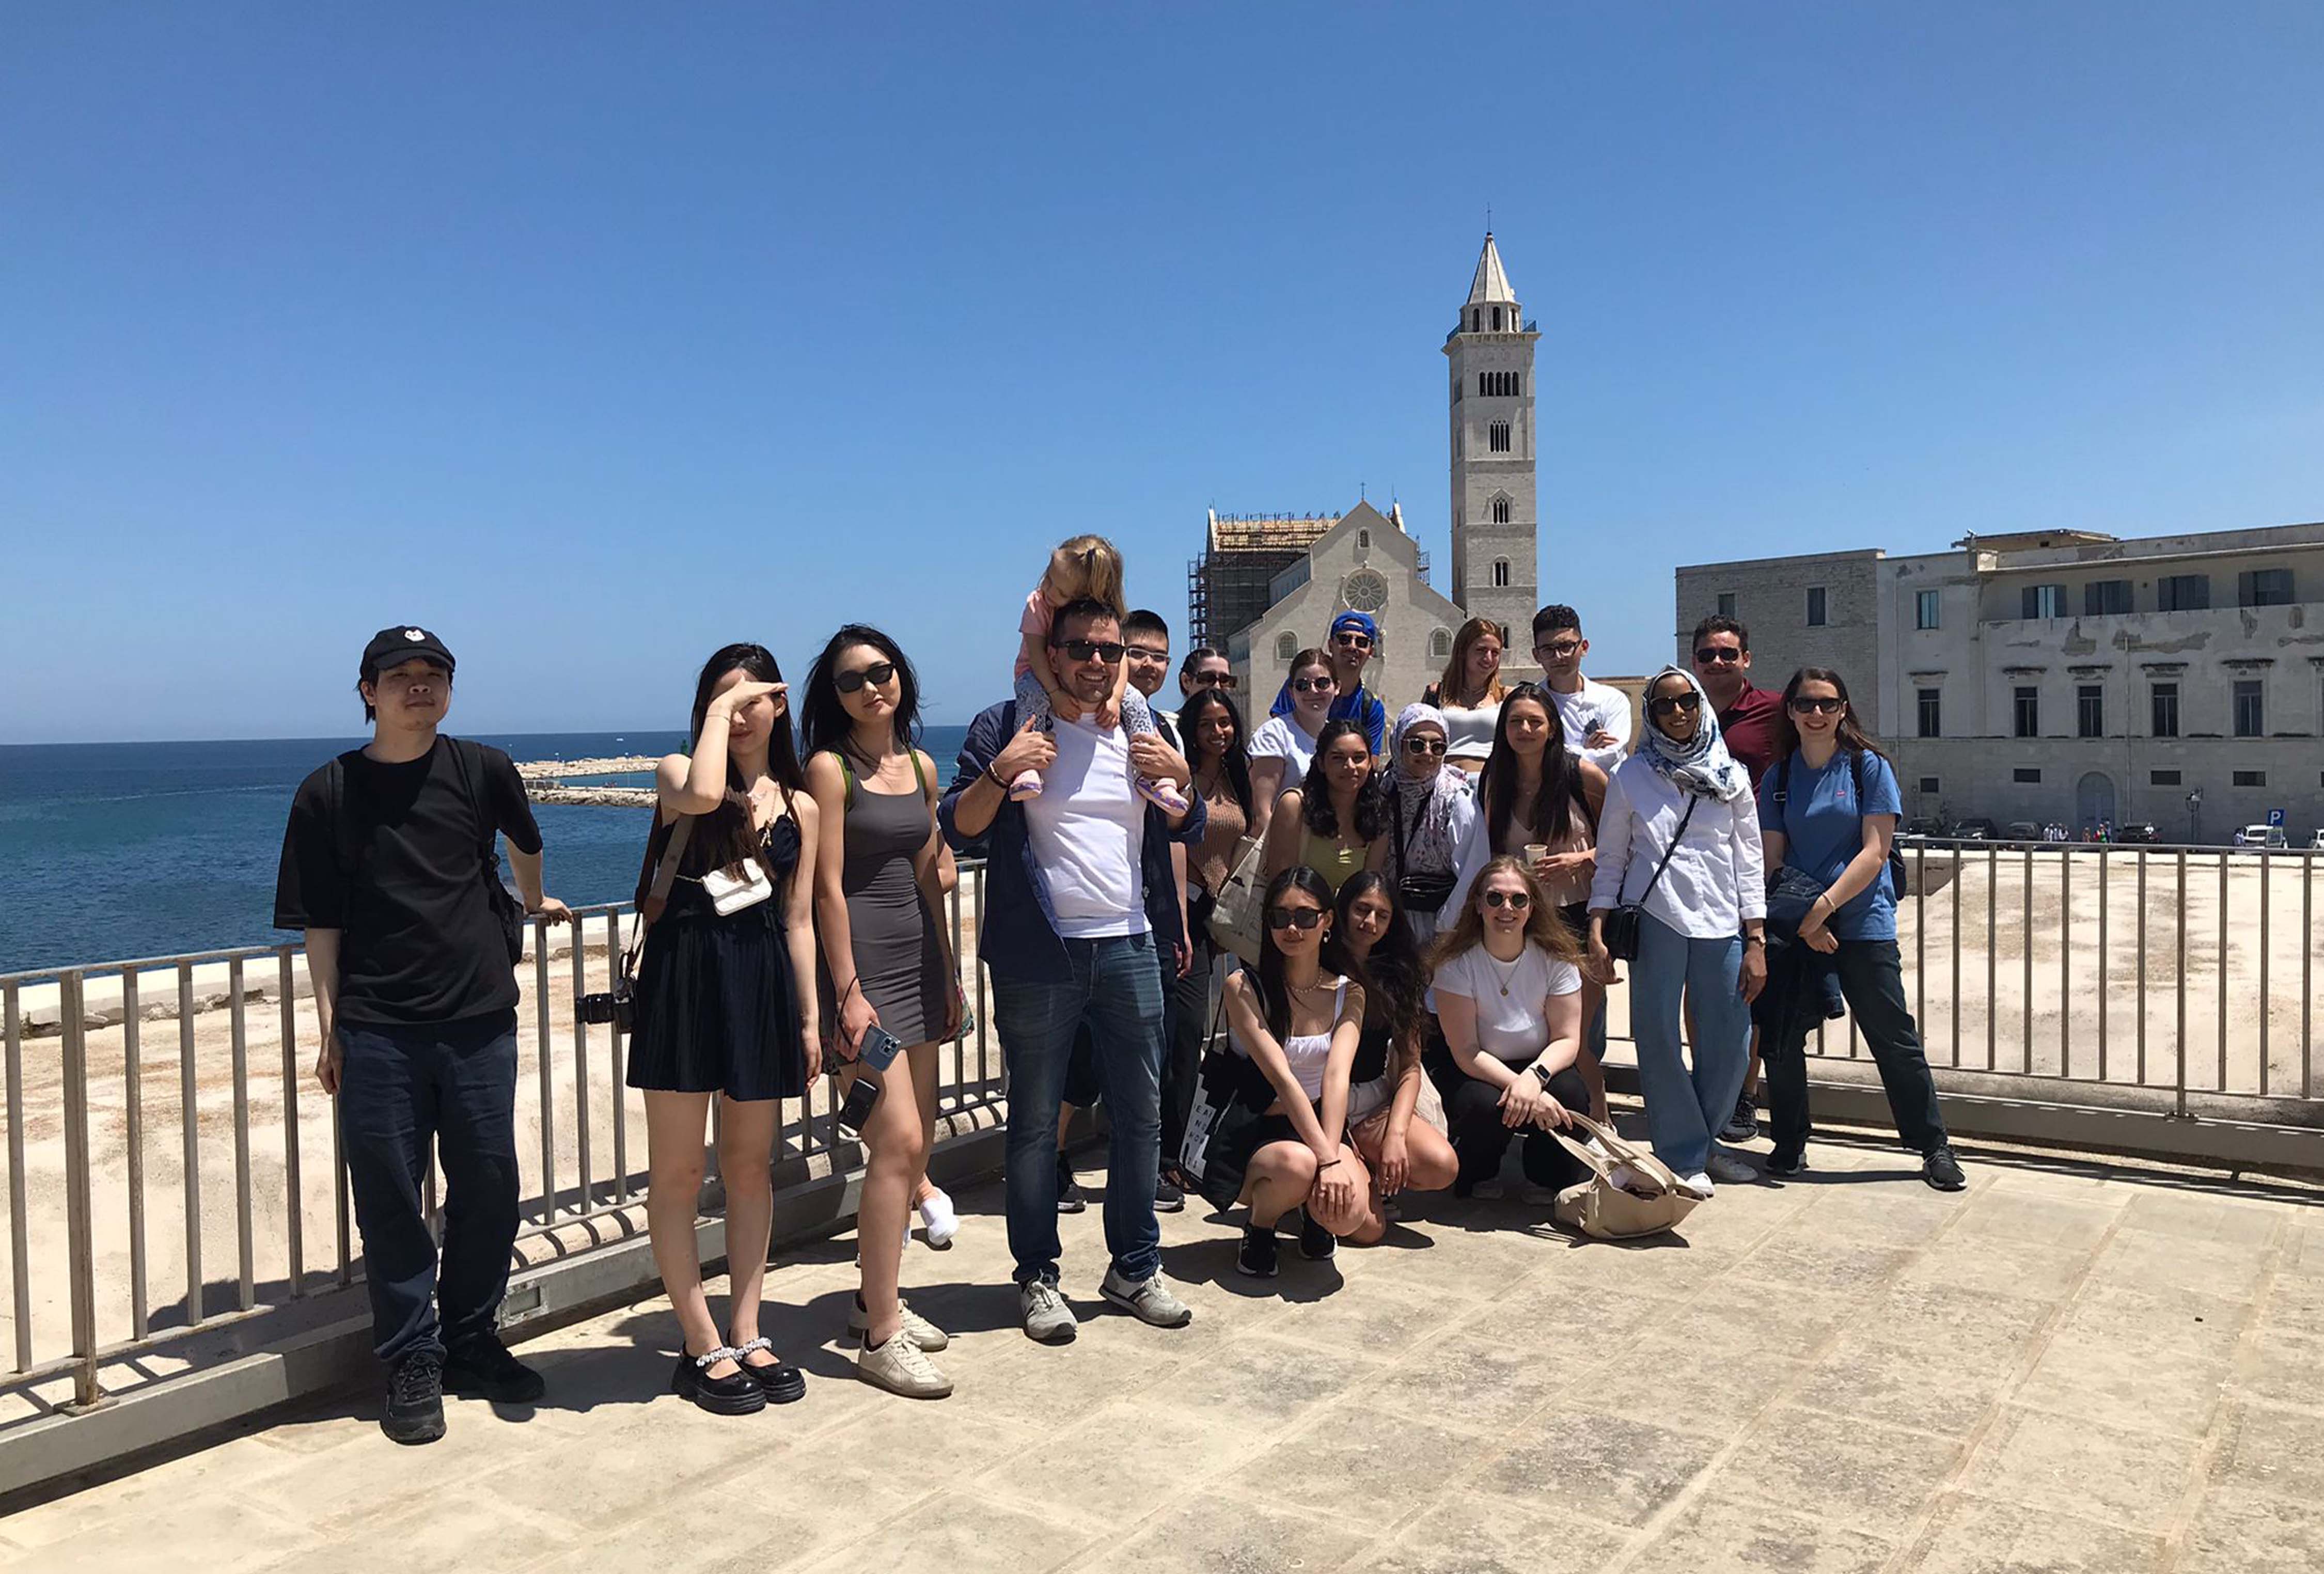 Students on a field trip in Trani, Italy